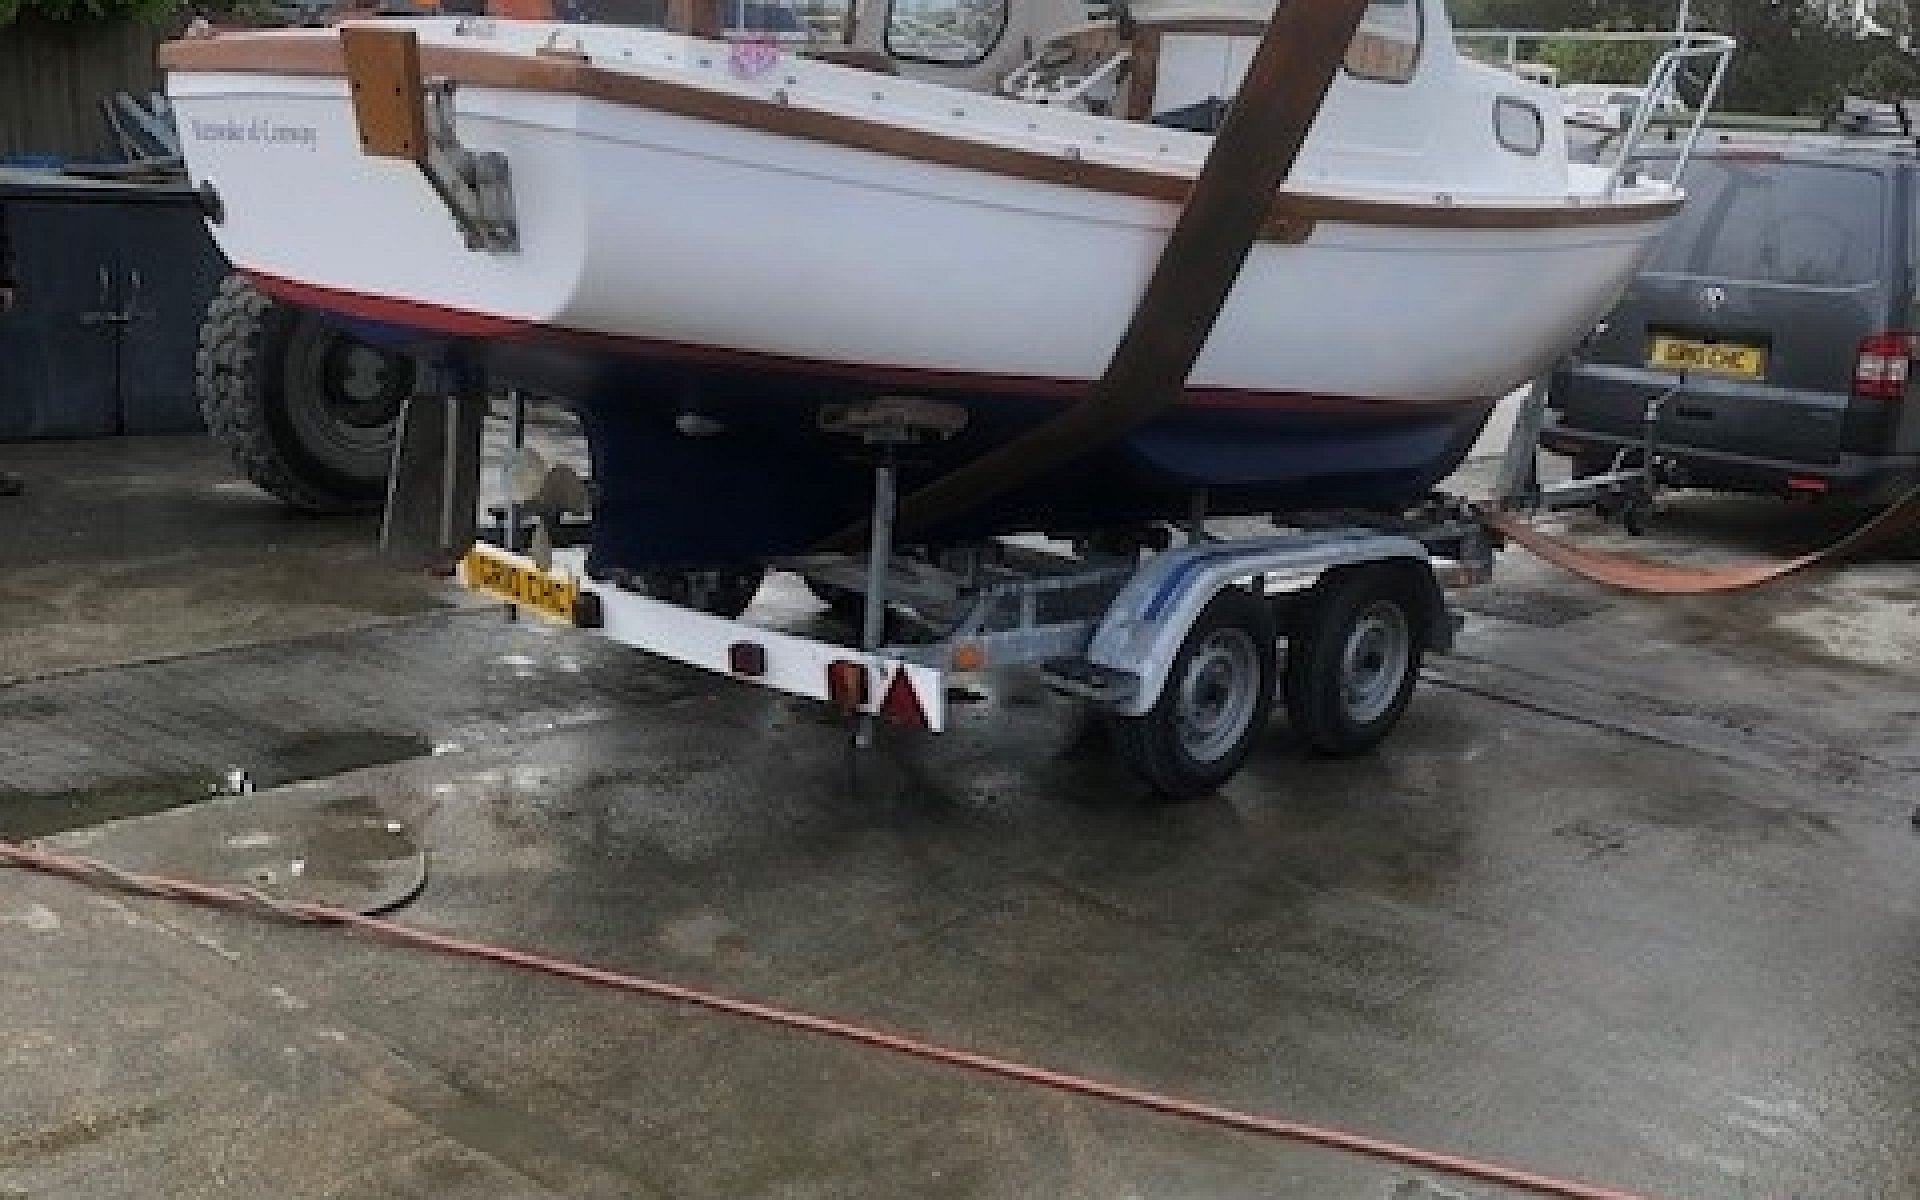 Aquastar 20 taken out of the water and in slings ready for transport